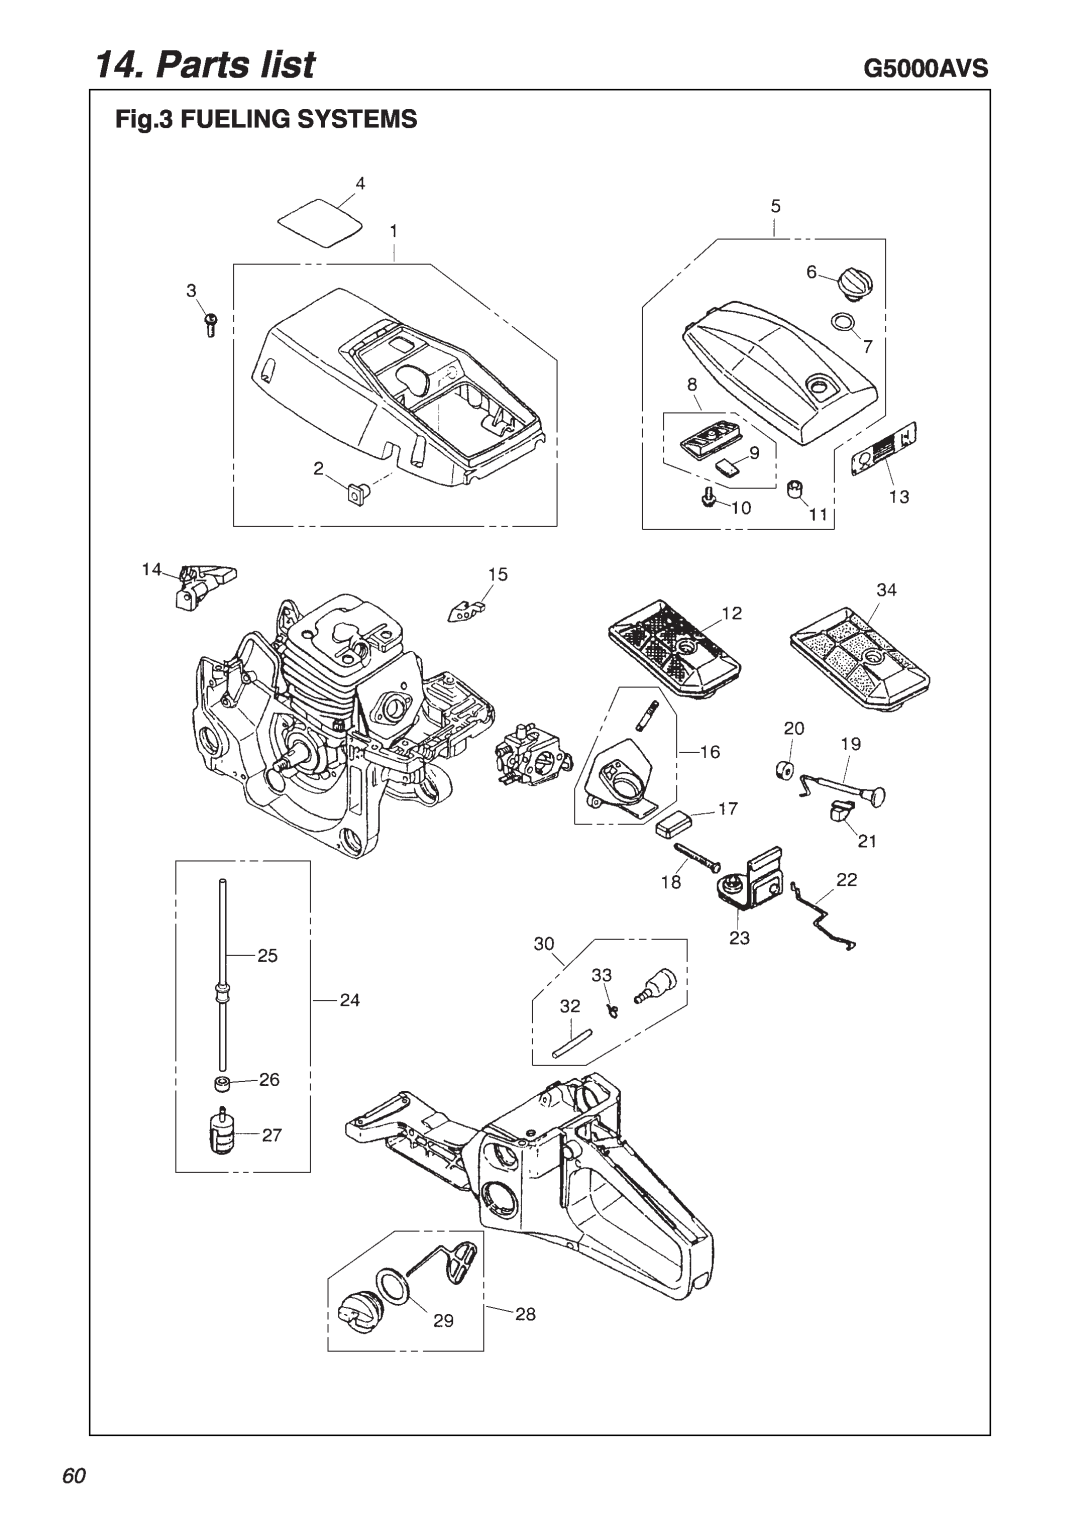 RedMax G5000AVS manual Fueling Systems, Parts list 